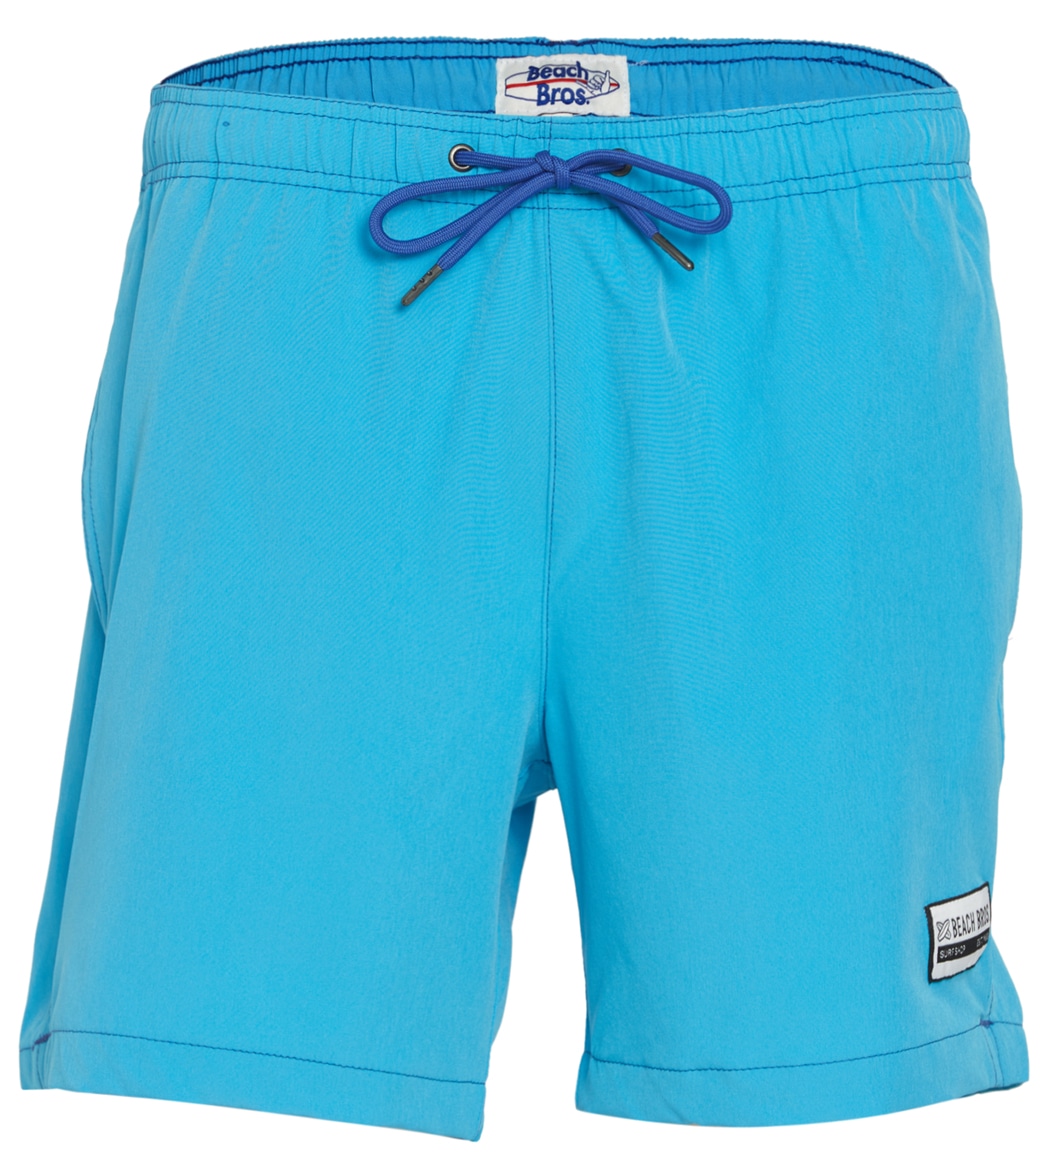 Beach Bros Men's Solid Contrast Swim Trunks - Neon Turq/Navy Small Polyester - Swimoutlet.com